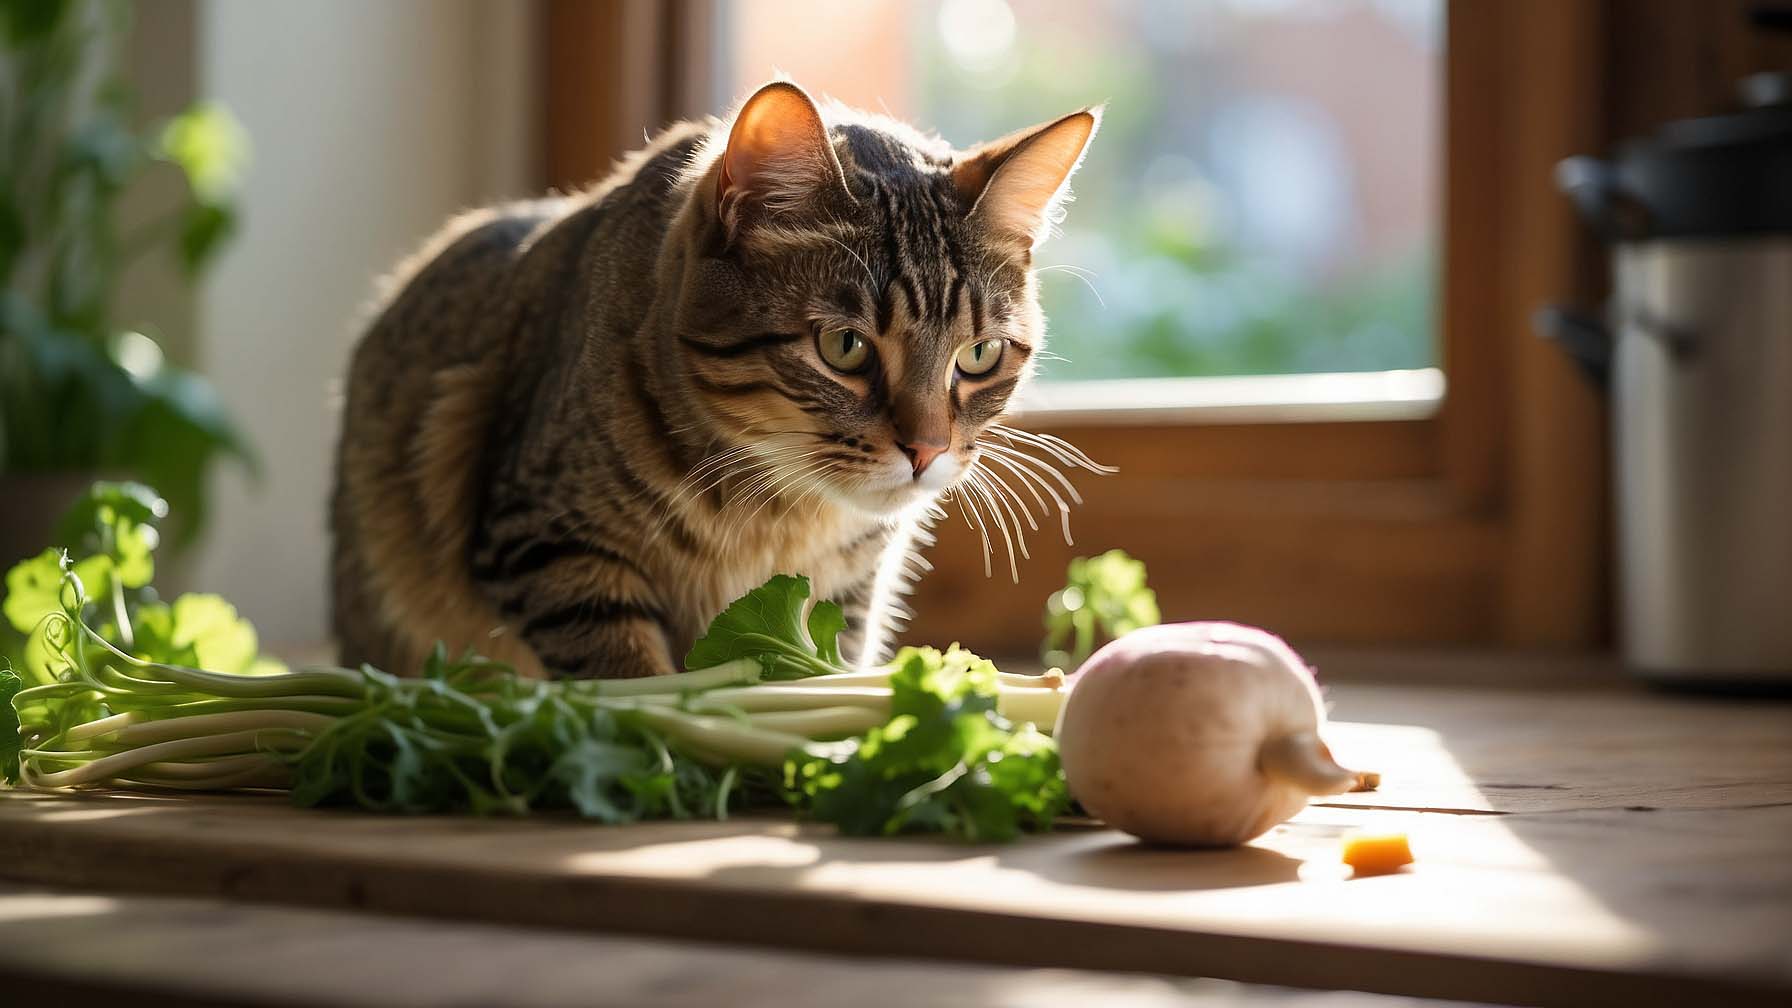 Can Cats Eat Turnips? Nutritional Insights and Safety Tips